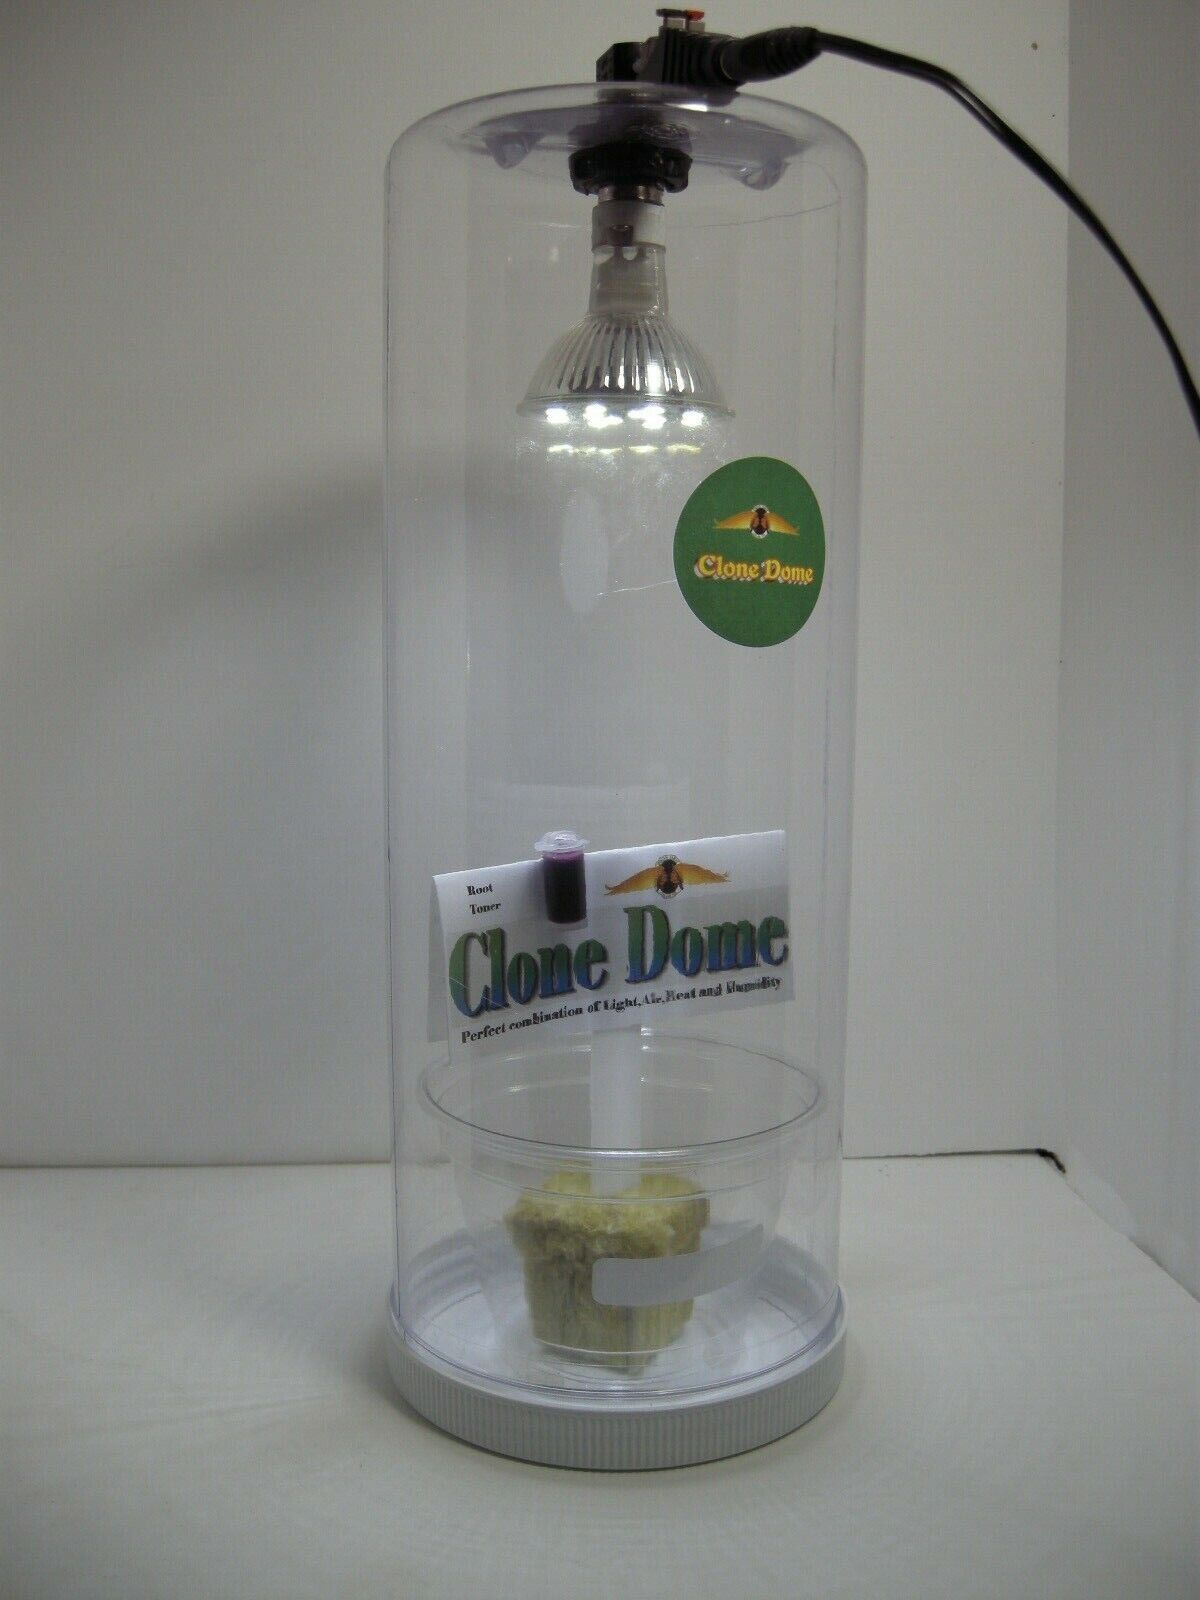 "CLONE DOME" For Cloning Pot Plants,Perfect Light,Heat,Air,Moisture,Led bulb Unbranded